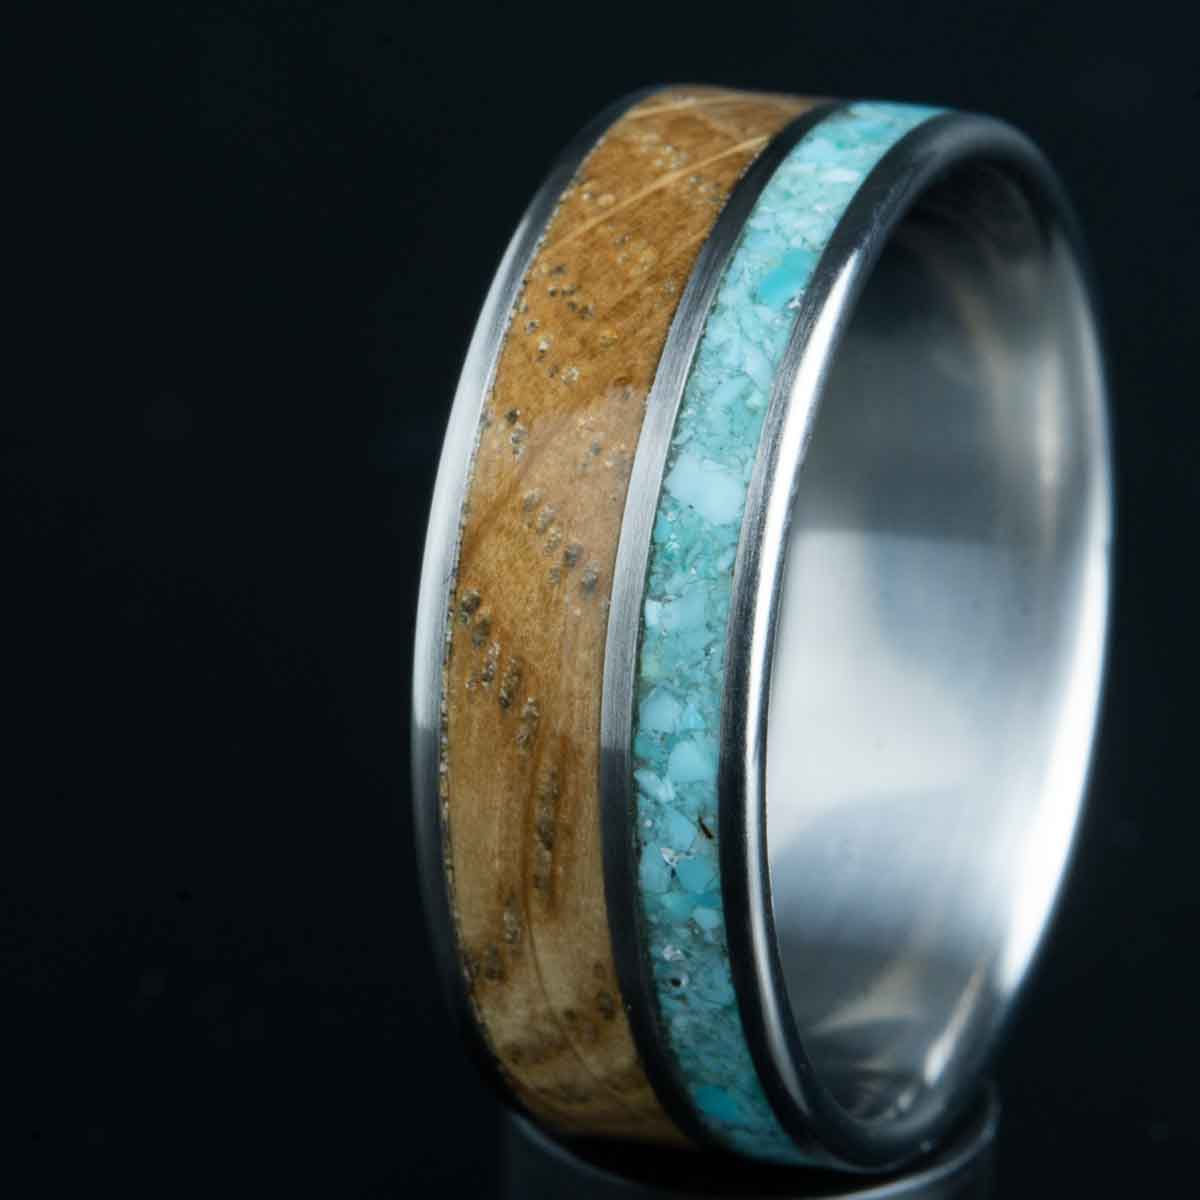 turquoise and whiskey barrel wedding ring by Peacefield Titanium